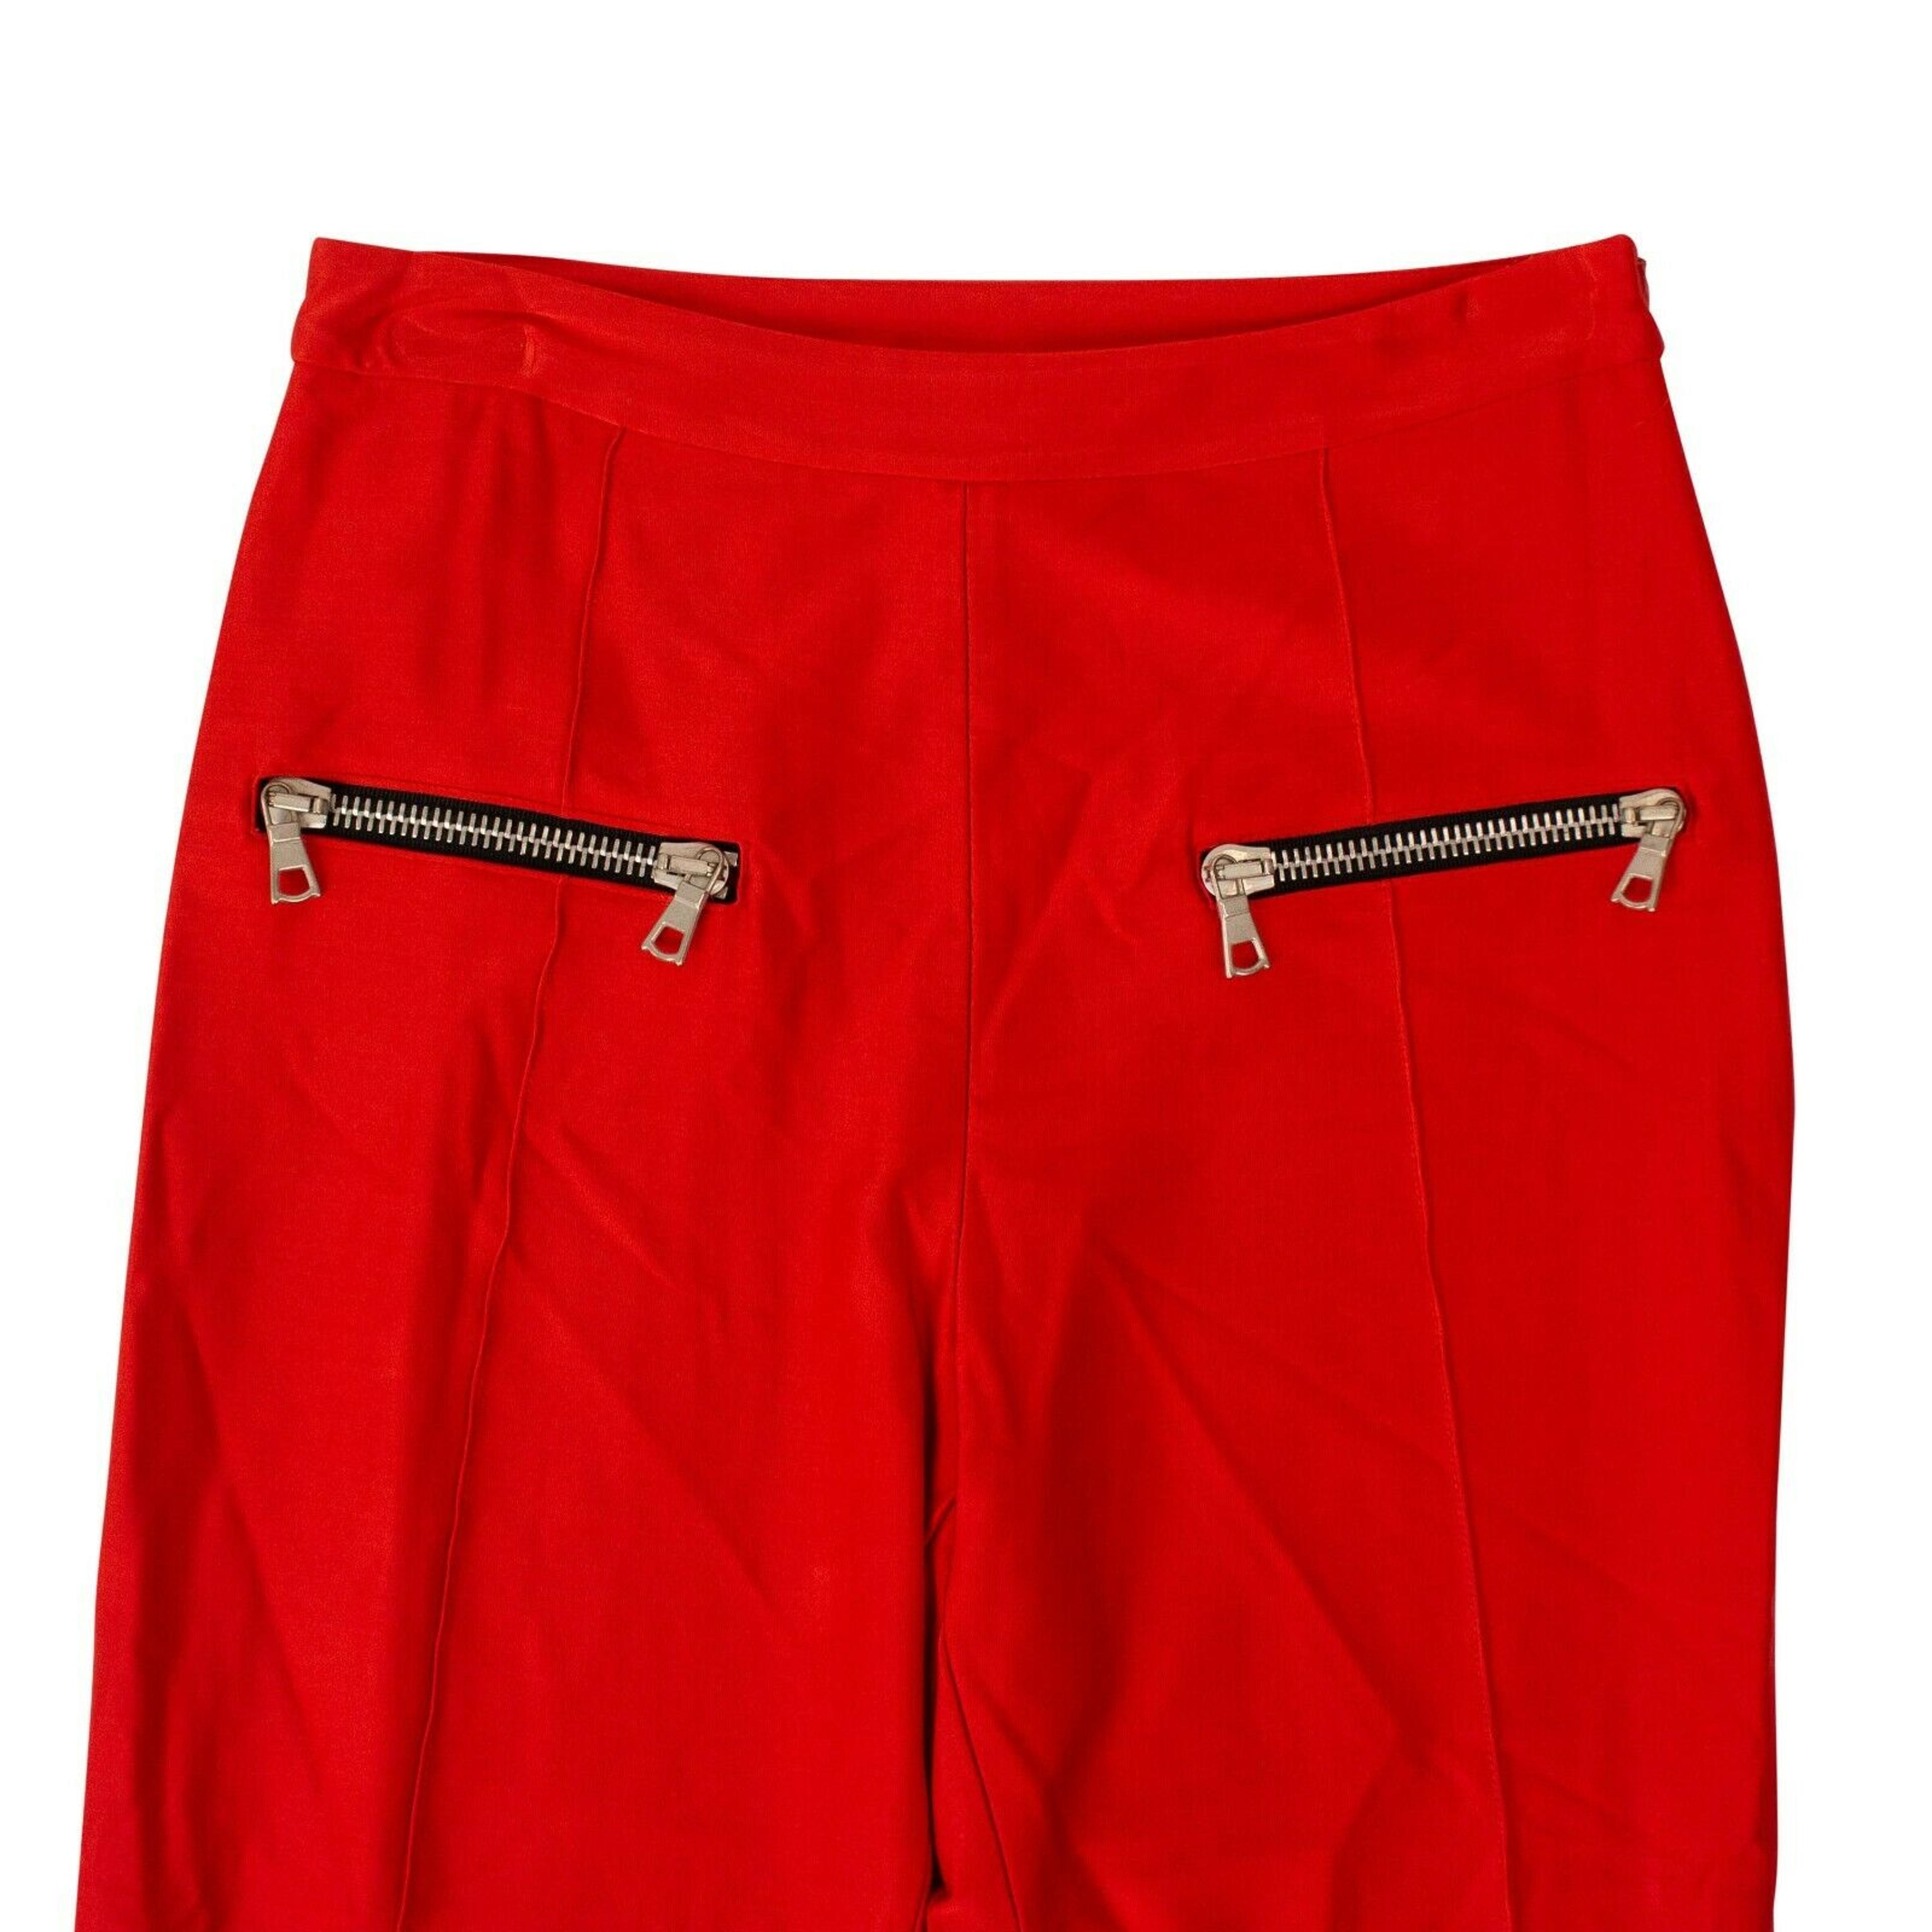 Alternate View 2 of Unravel Project Slim Fit Stirrup Pants - Red